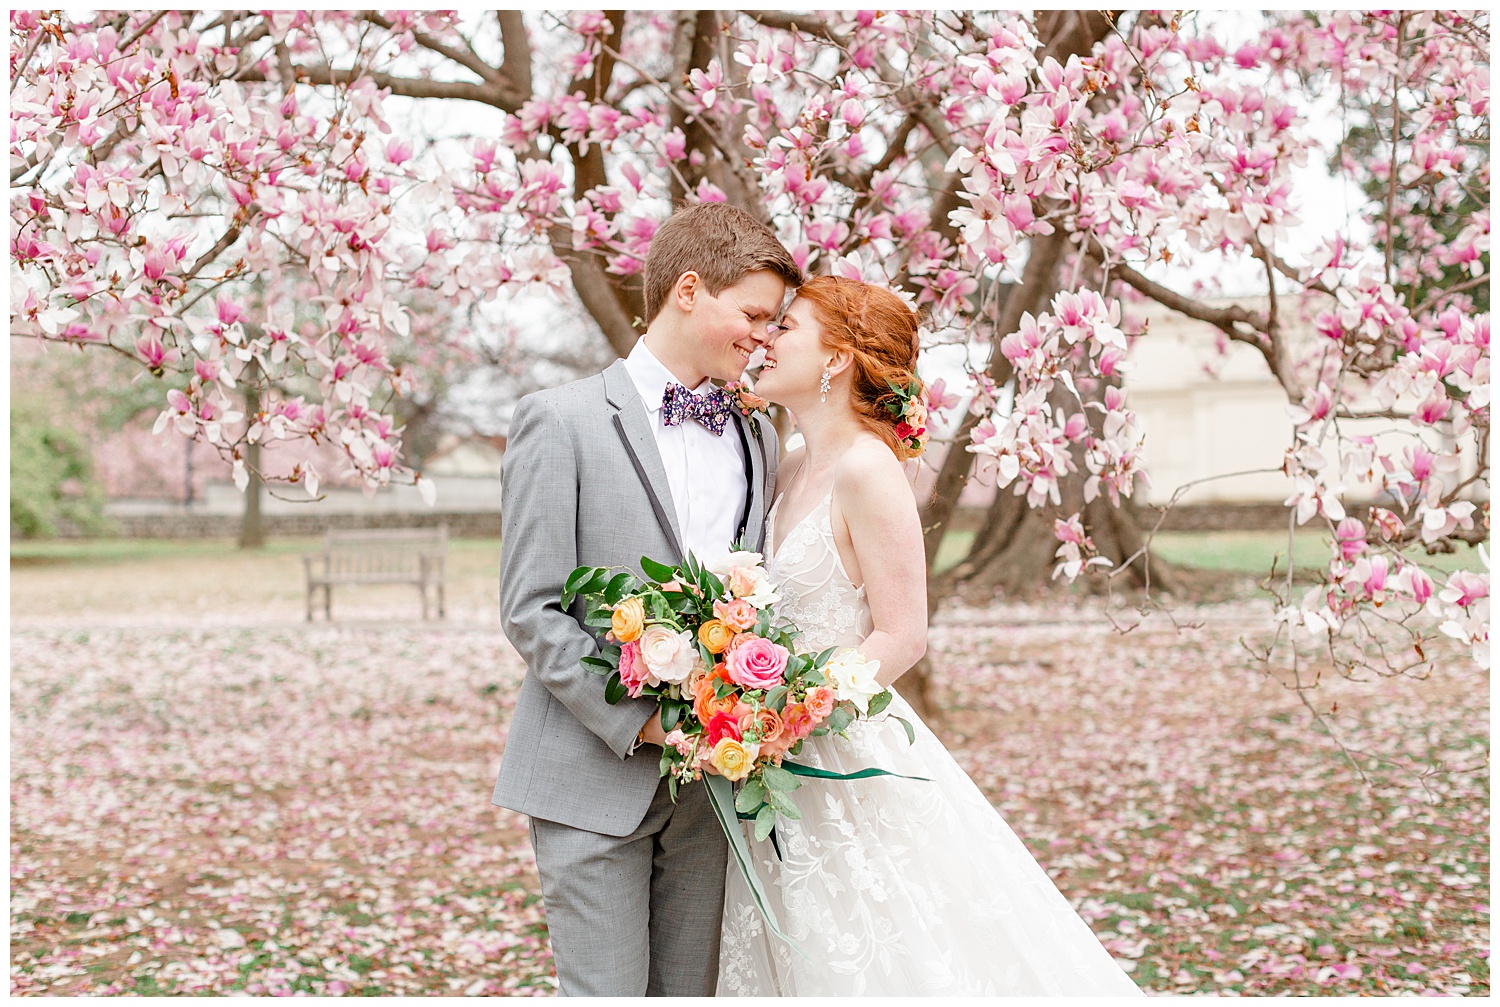 Ashley and Grant sharing a kiss under the cherry blossoms in the rain on their wedding day.